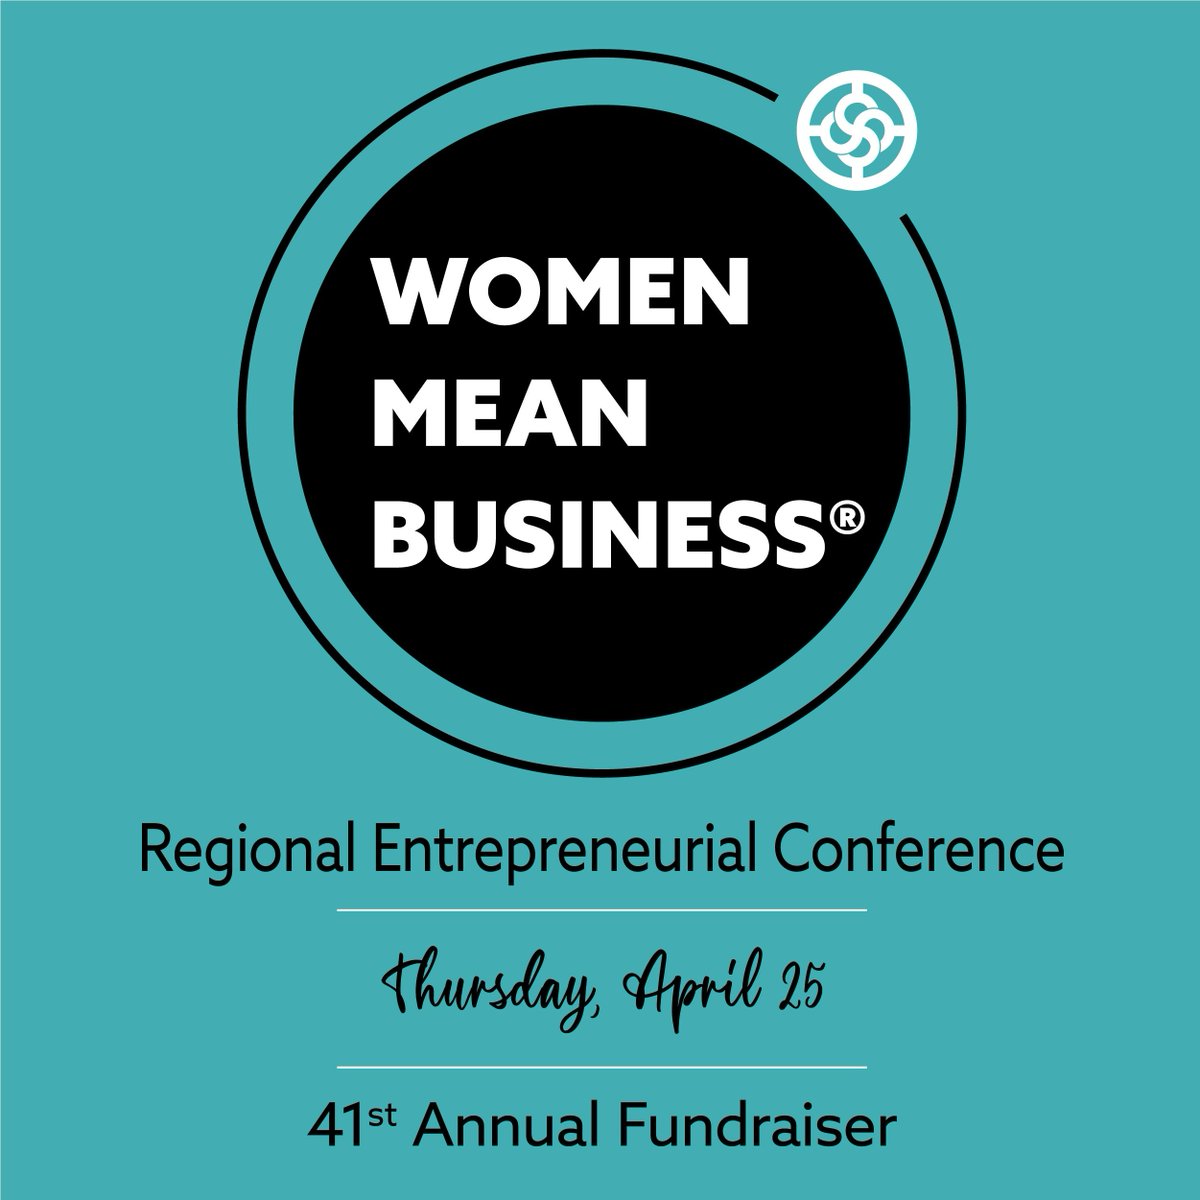 Our WE Hub Manager, Shelby Flores, will have a table showcasing our Women’s Entrepreneurship Hub (WE Hub) at Women Mean Business®: @nawbochicago’s Entrepreneurial Conference on 5/25 | 8 am-6pm. Will you be there? Stop by the WE Hub table & meet Shelby! bit.ly/Fundraiser41